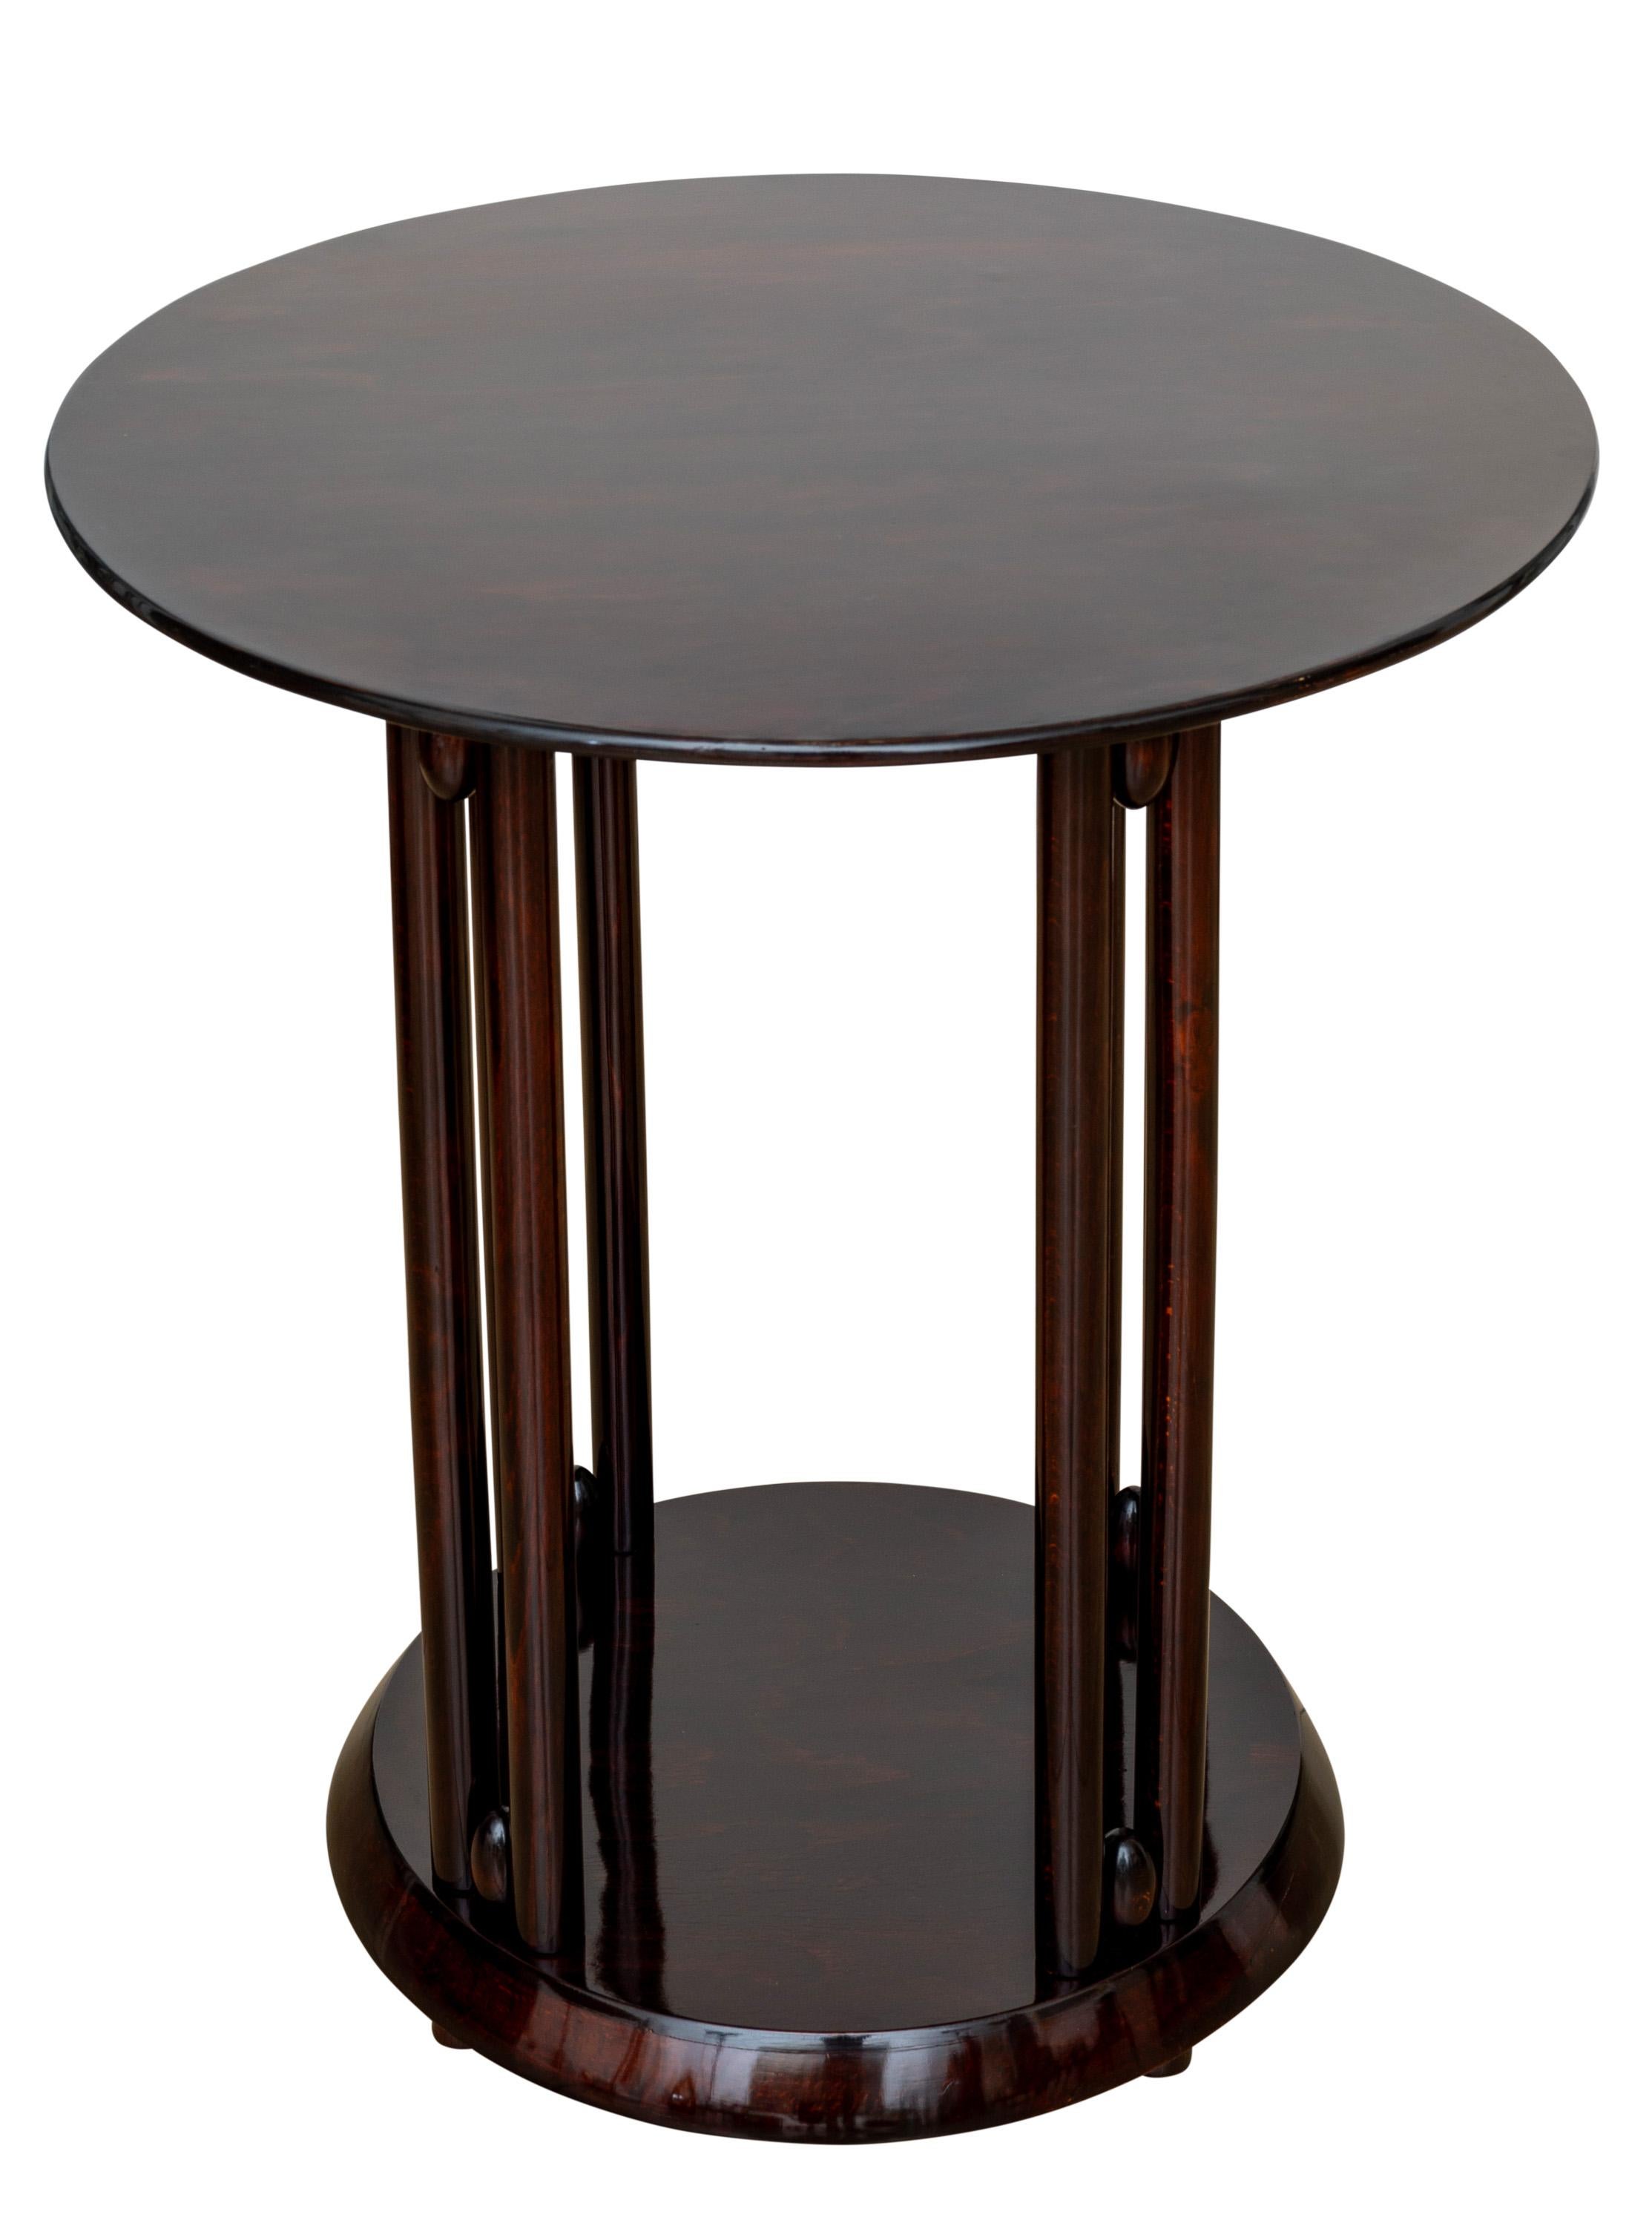 Table model Fledermaus Josef Hoffmann Thonet ca. 1912

The Wiener Werkstatte experienced its most glamorous phase in the period around 1905. Many of the pieces created at that time were later part of the design canon. The pieces known as